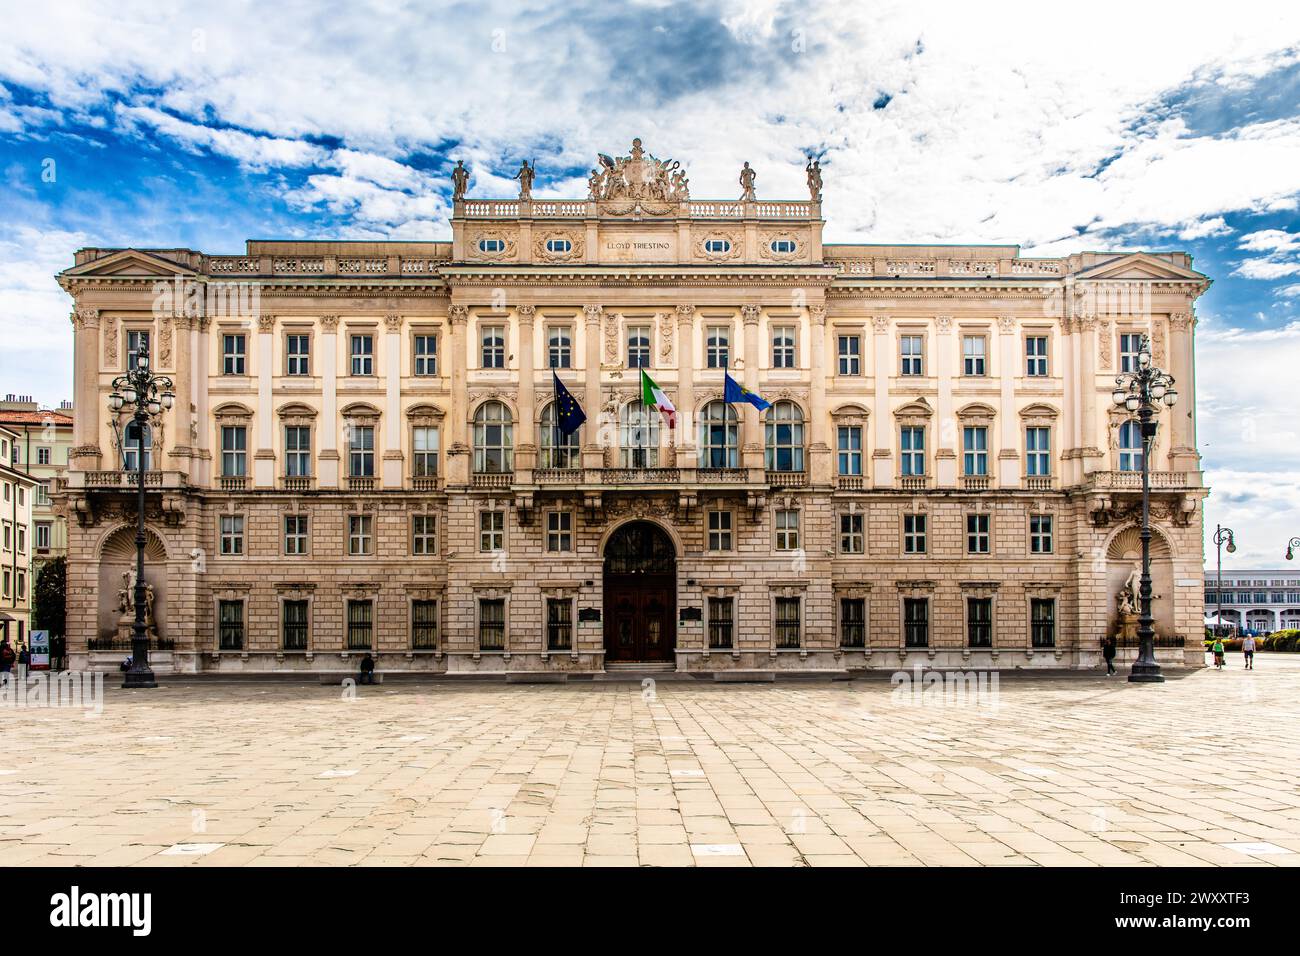 Palazzo del Lloyd Triestino, 1883, Piazza Unita d'Italia in the heart of the city, surrounded on three sides by magnificent neoclassical buildings Stock Photo